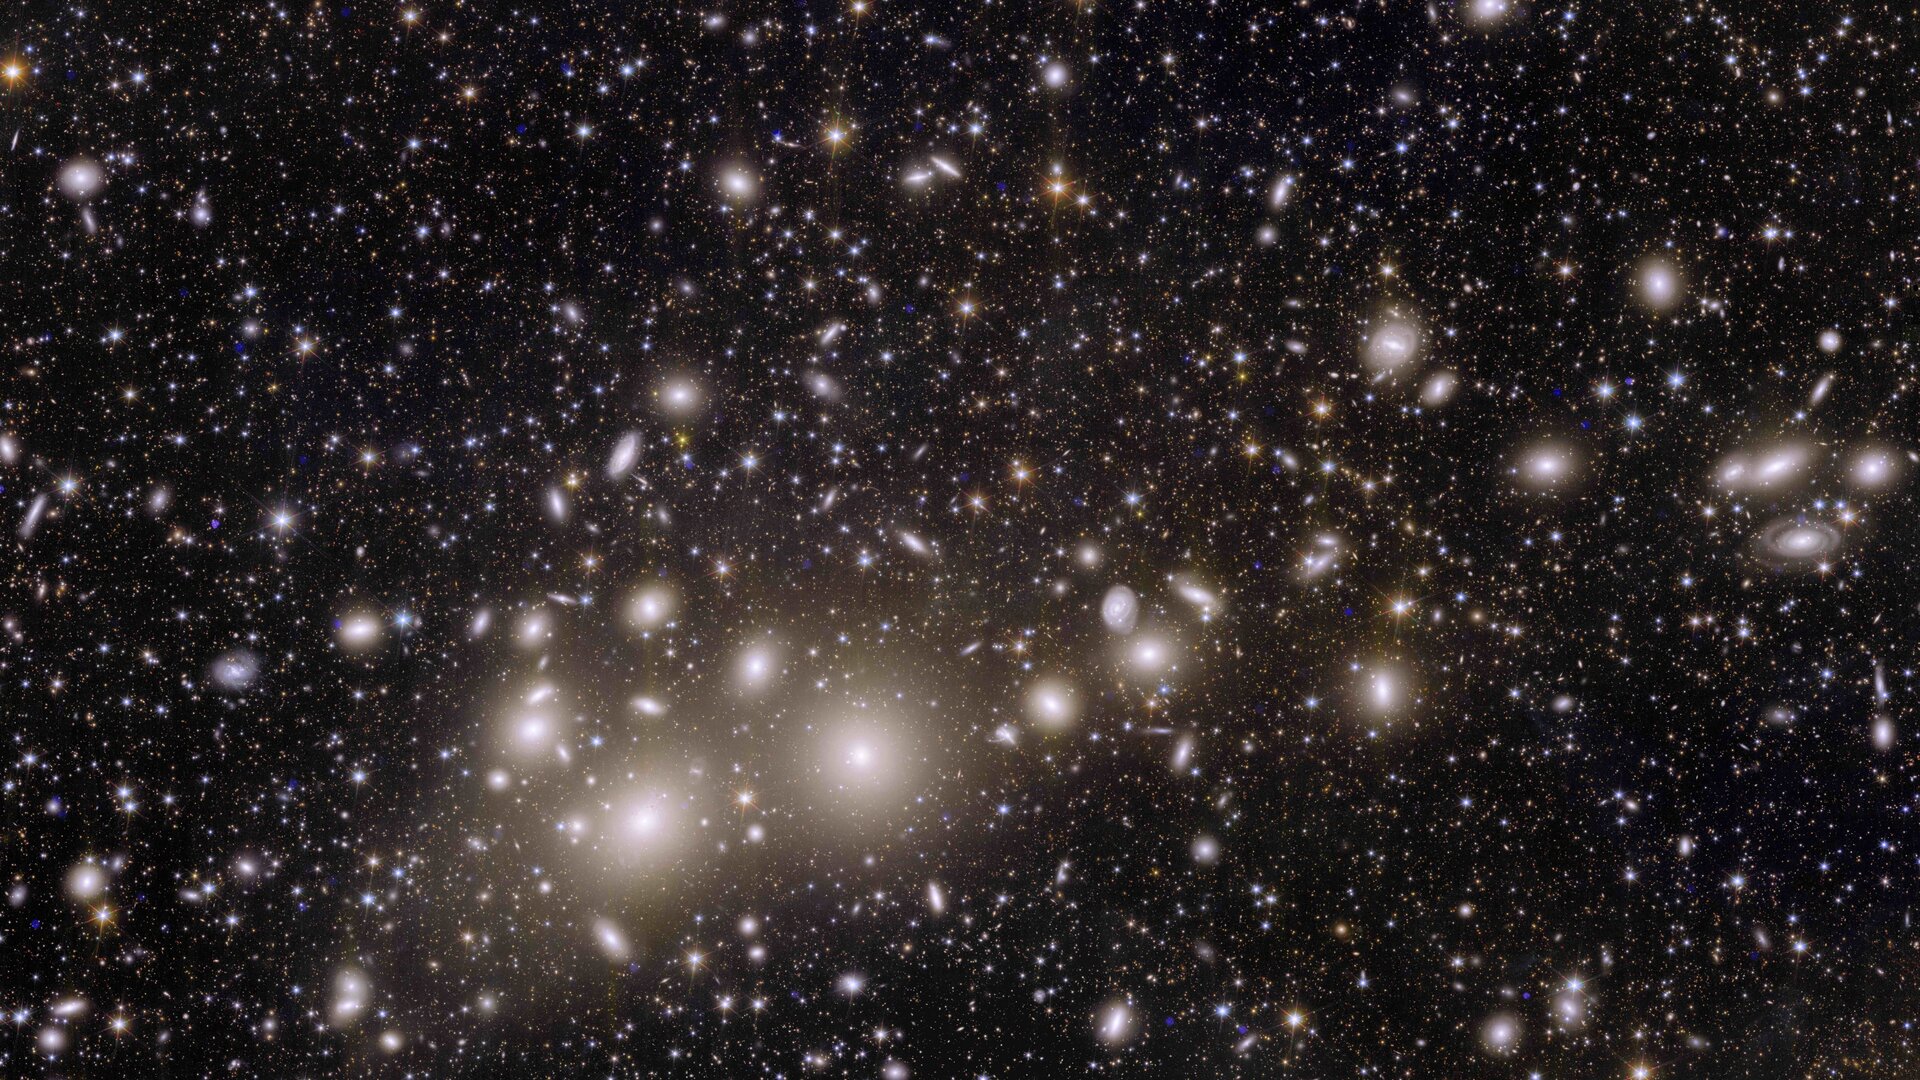 Telescope Euclid’s view of the Perseus cluster of galaxies